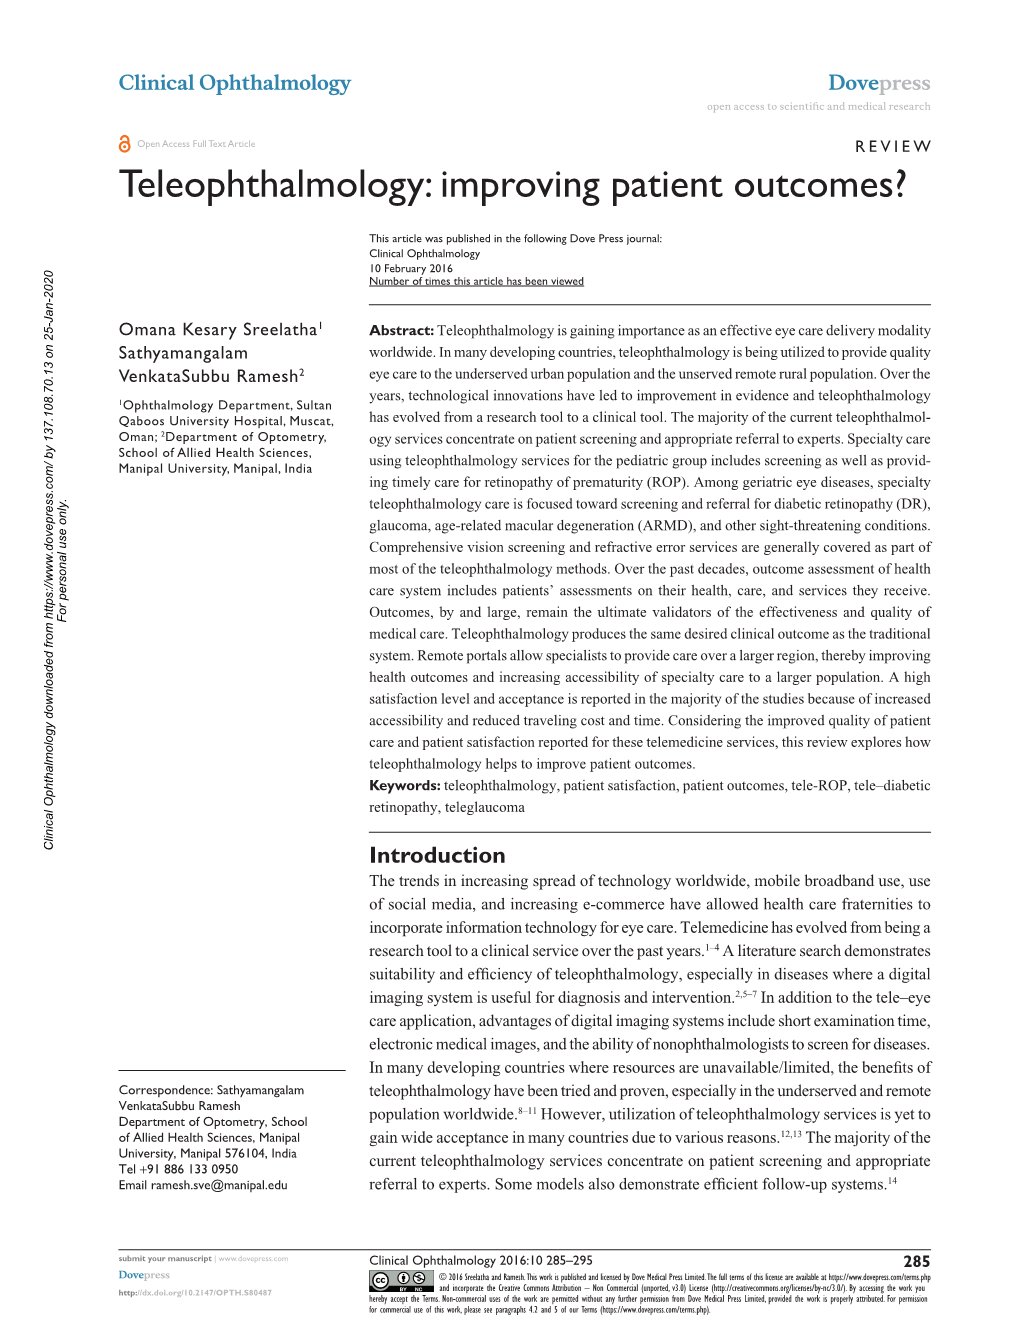 Teleophthalmology: Patient Outcomes Open Access to Scientific and Medical Research DOI